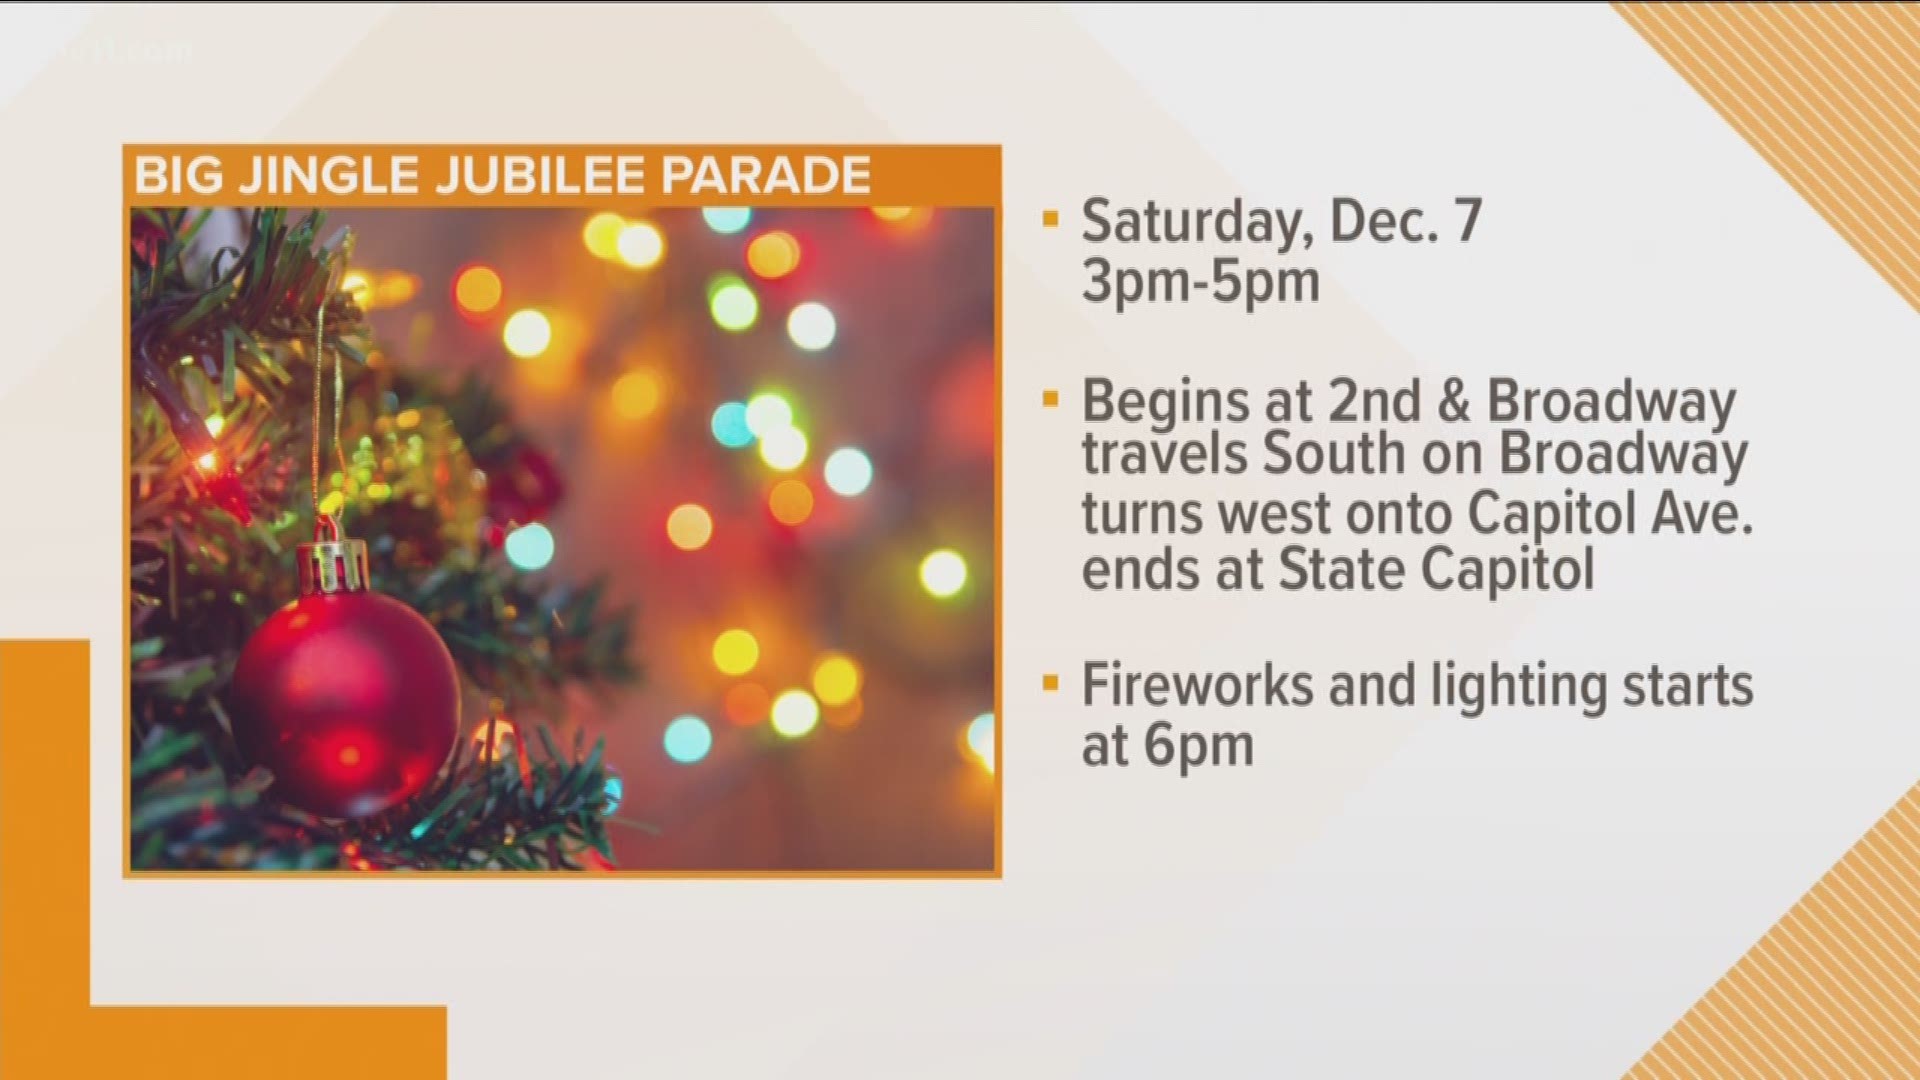 We're really heading into the Christmas season. Little Rock is having its Big Jingle Jubilee Holiday parade tomorrow afternoon.